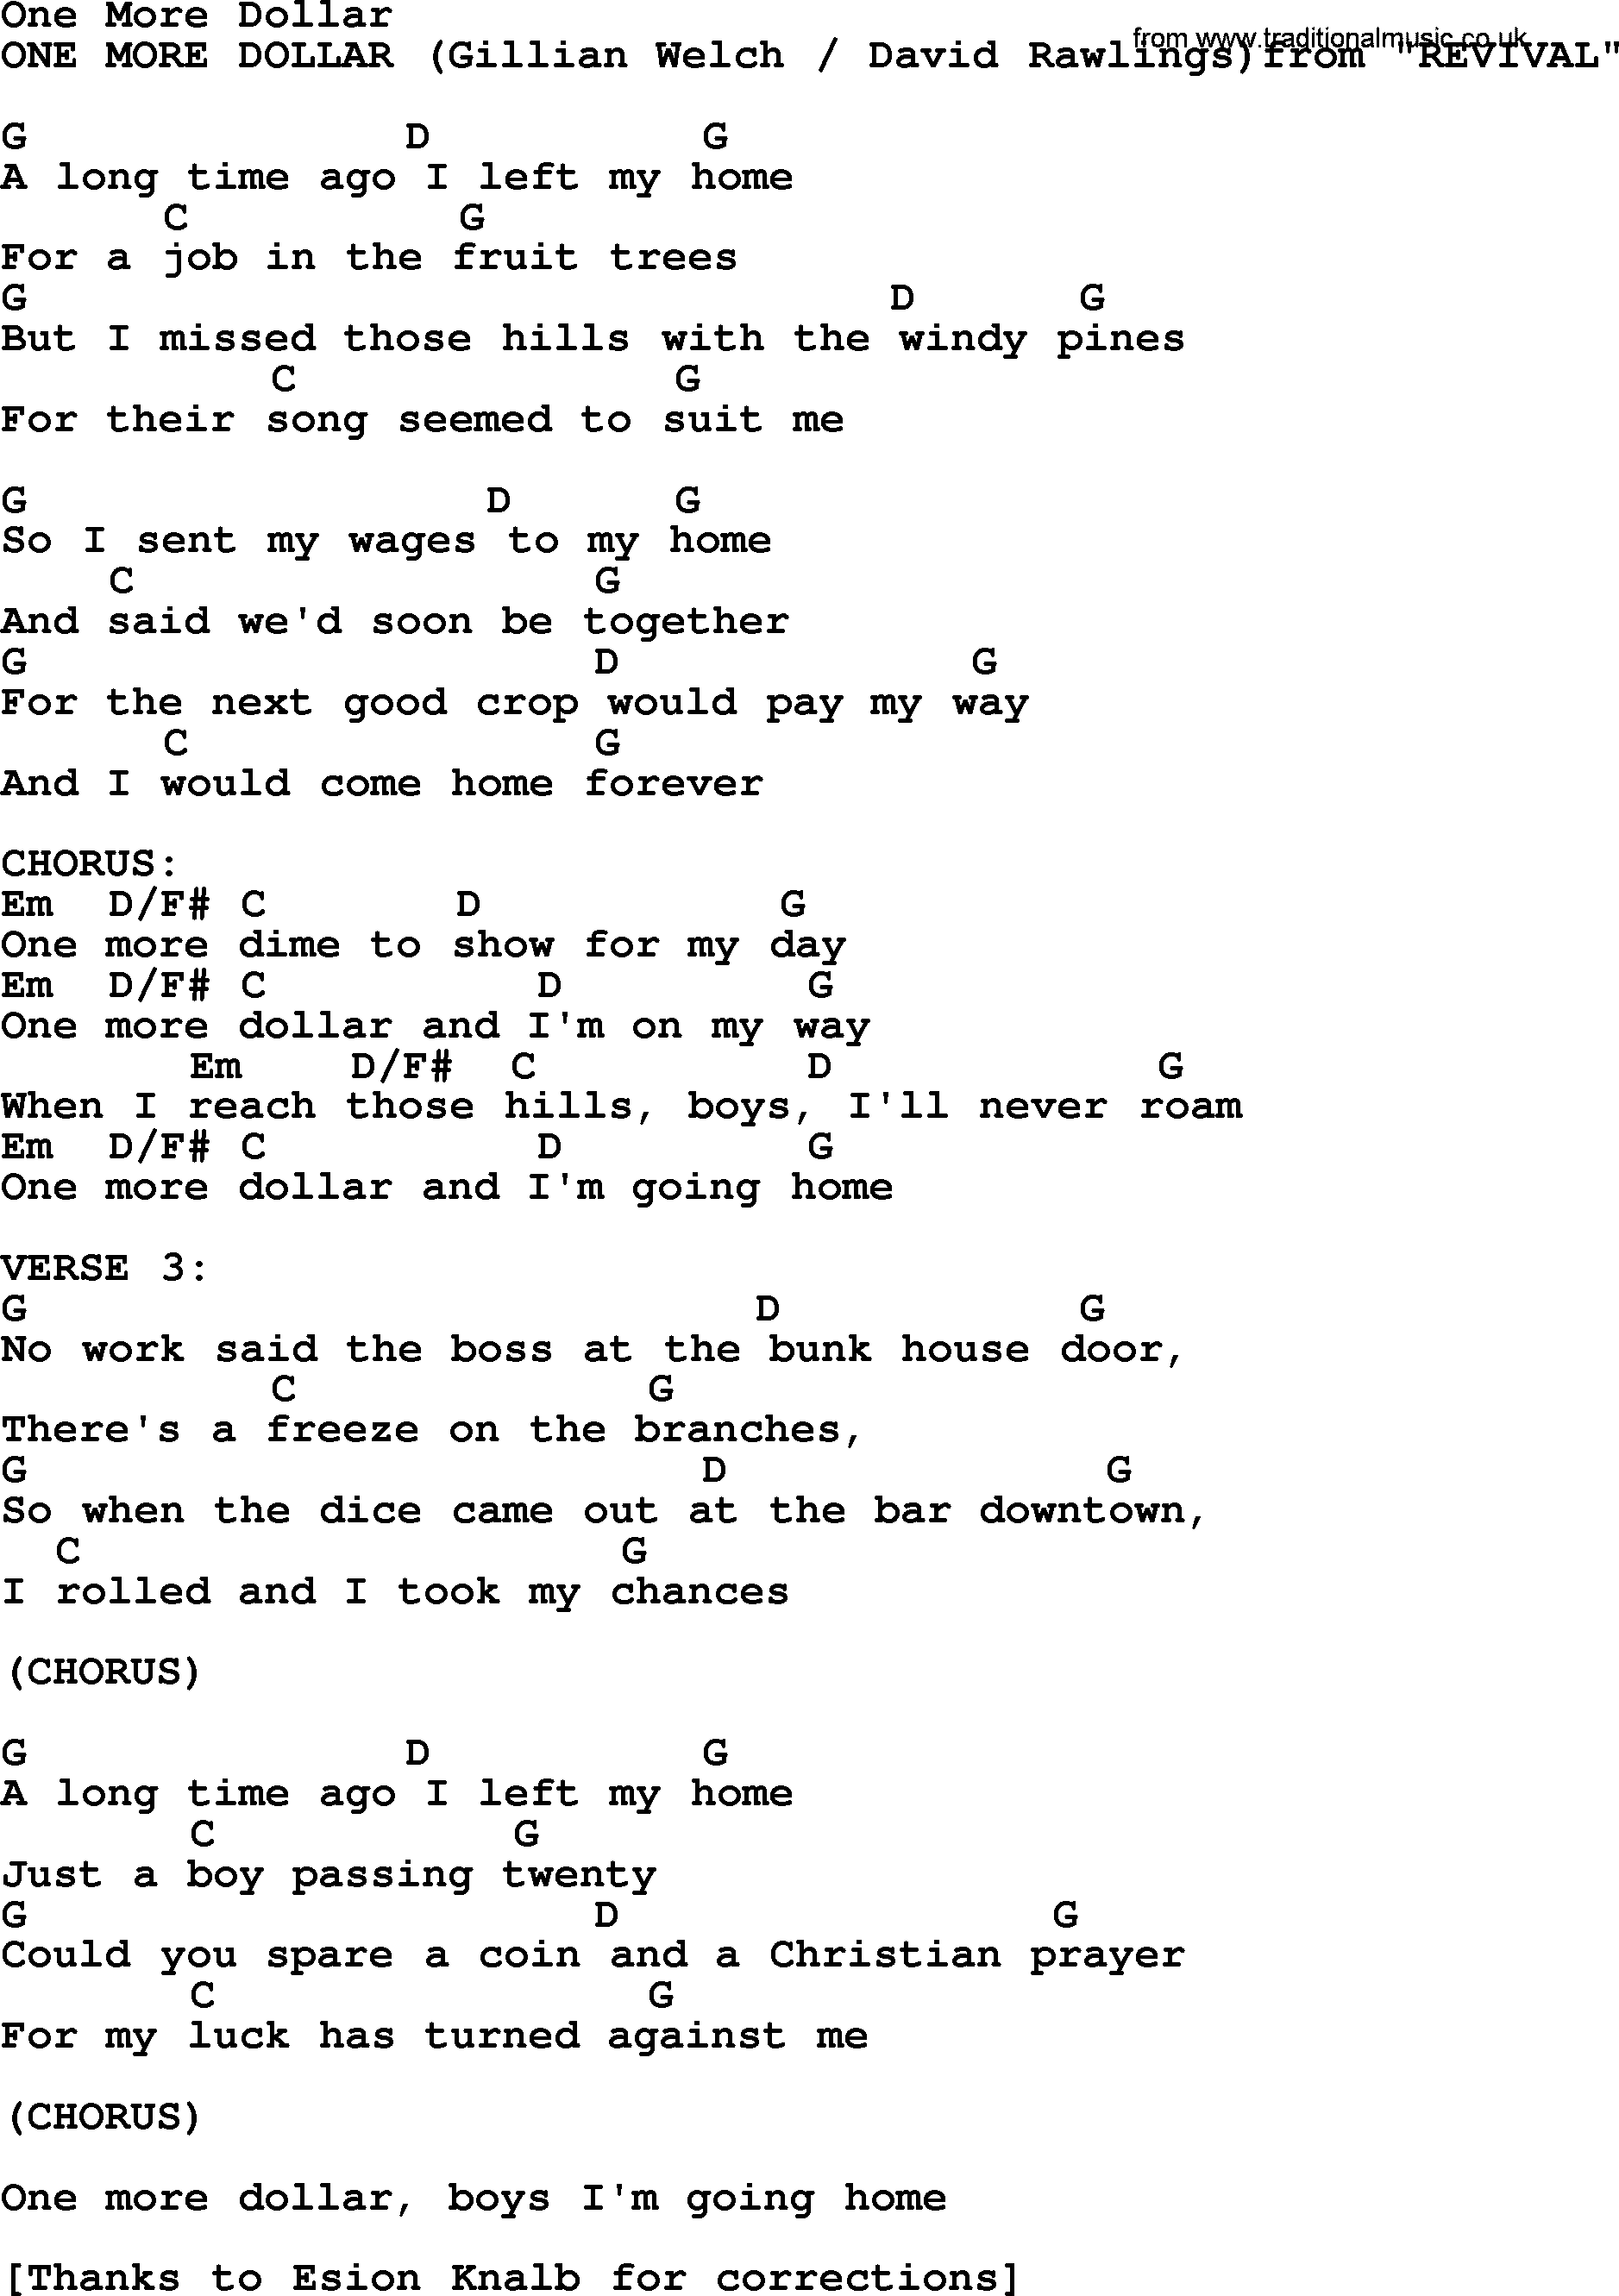 Bluegrass song: One More Dollar, lyrics and chords